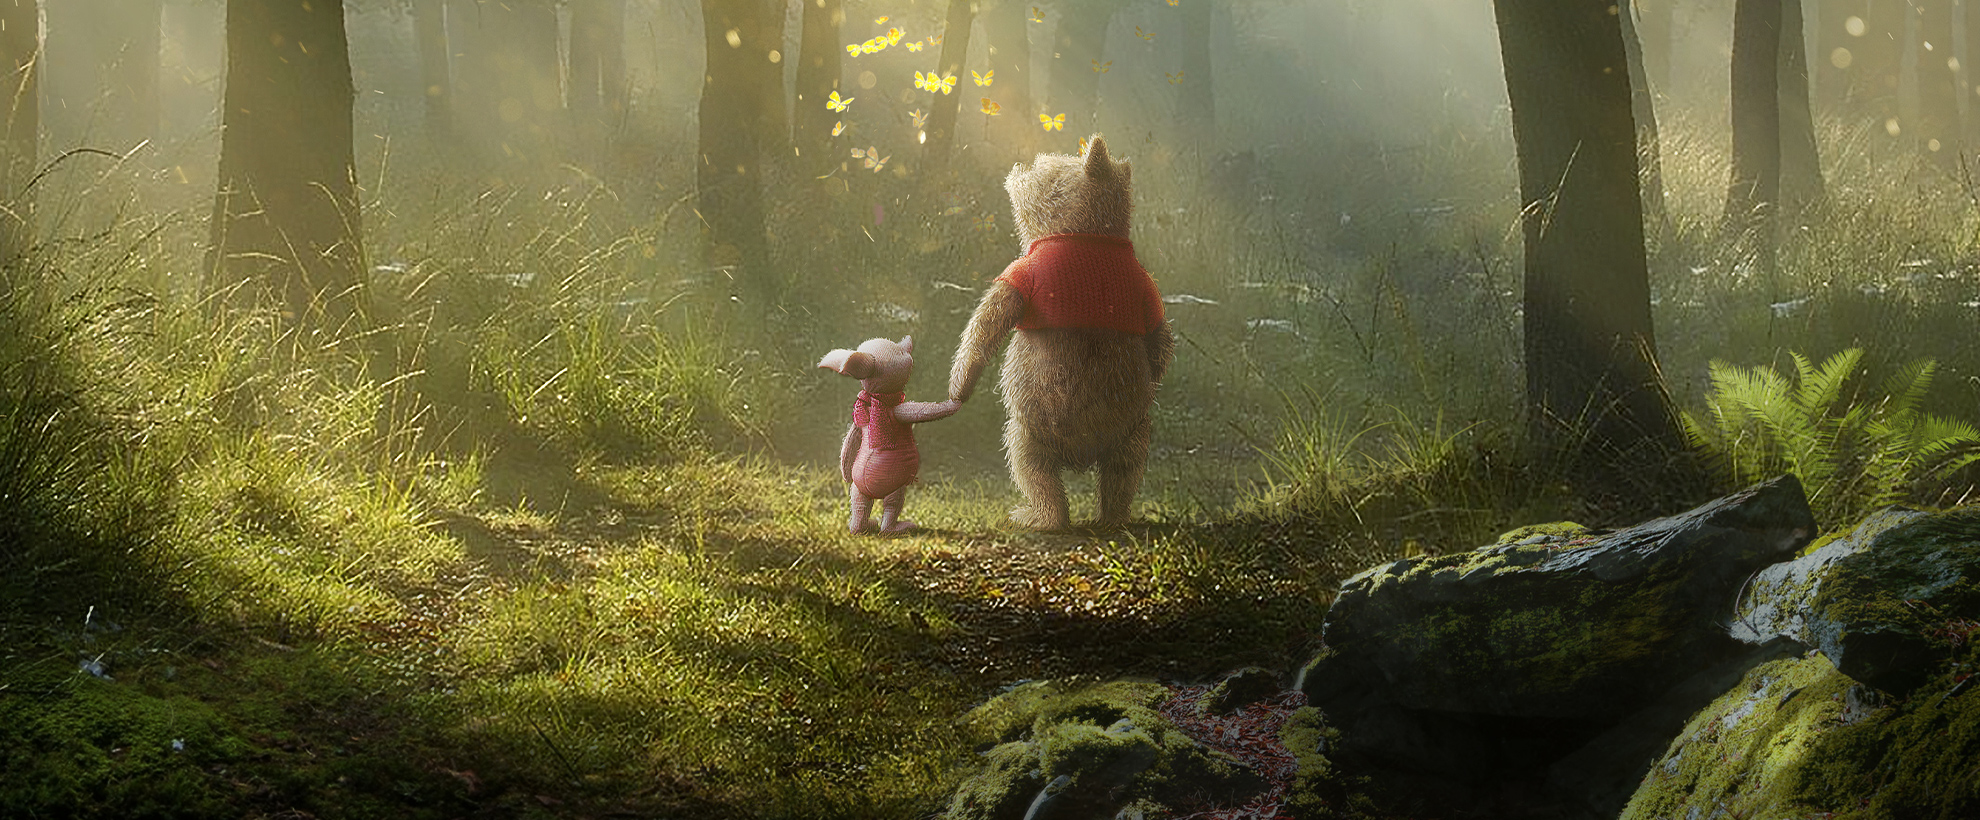 Concept art of Pooh and Piglet, holding hands and walking through the hundred acre wood